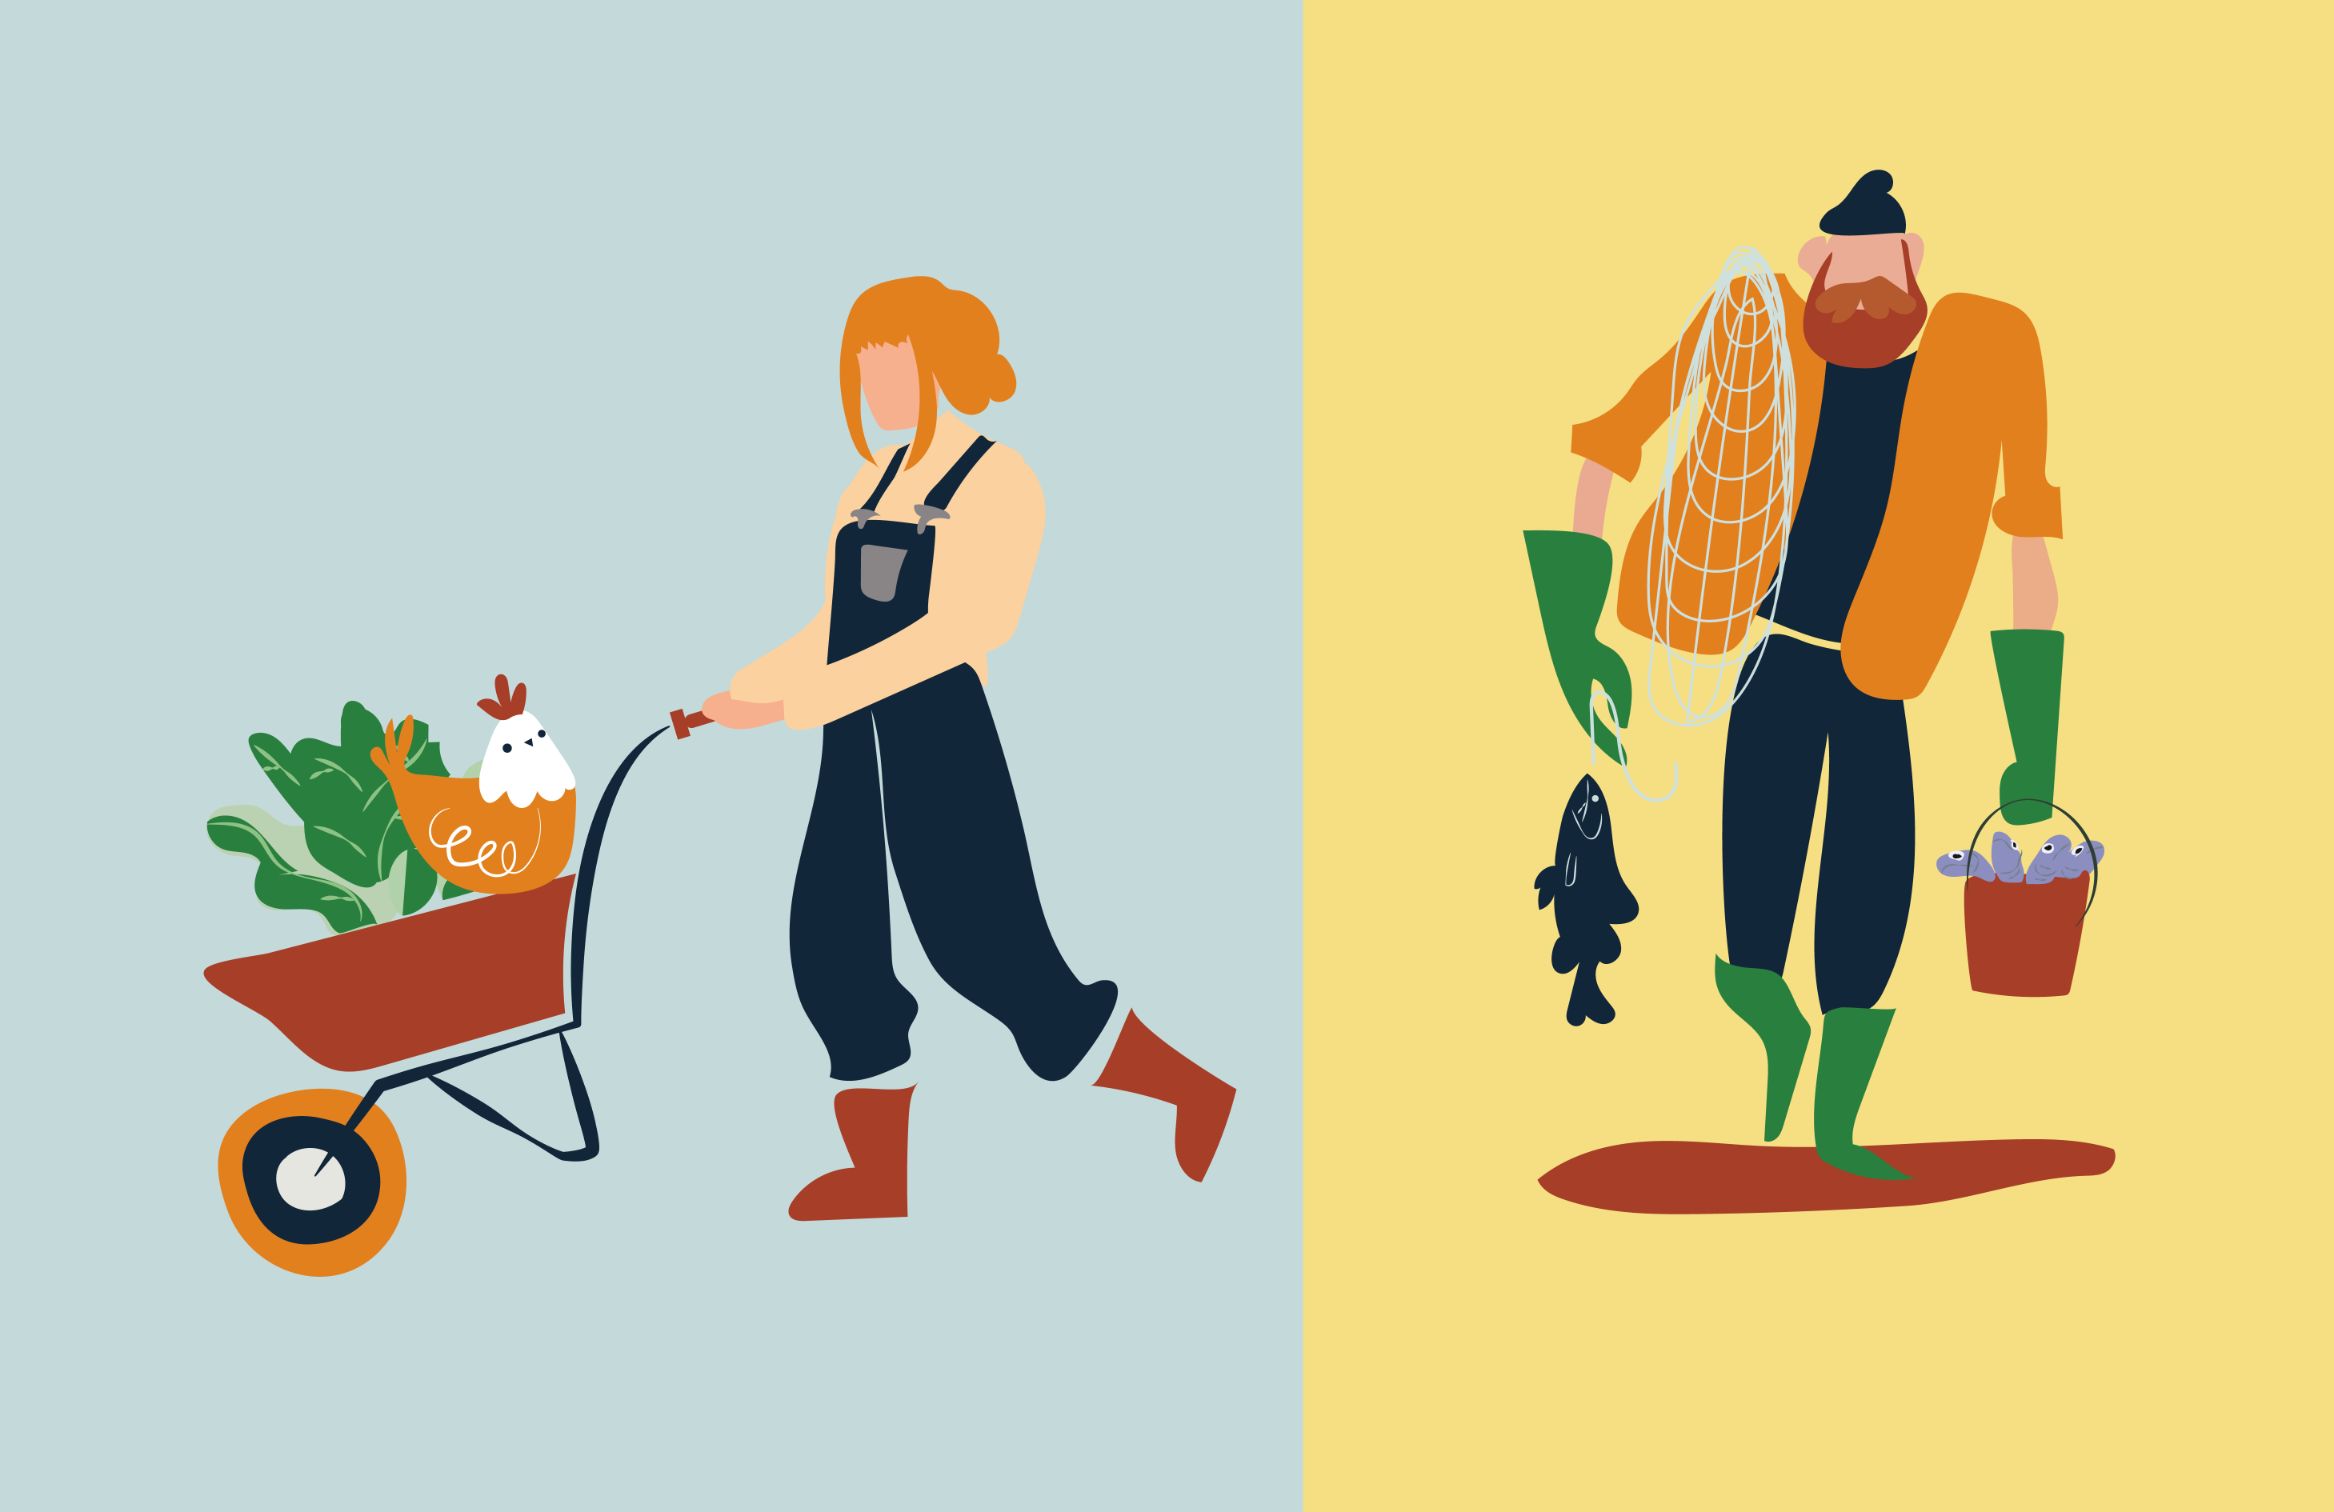 Illustration of a woman holding a wheelbarrow and a bearded fisherman holding a fish